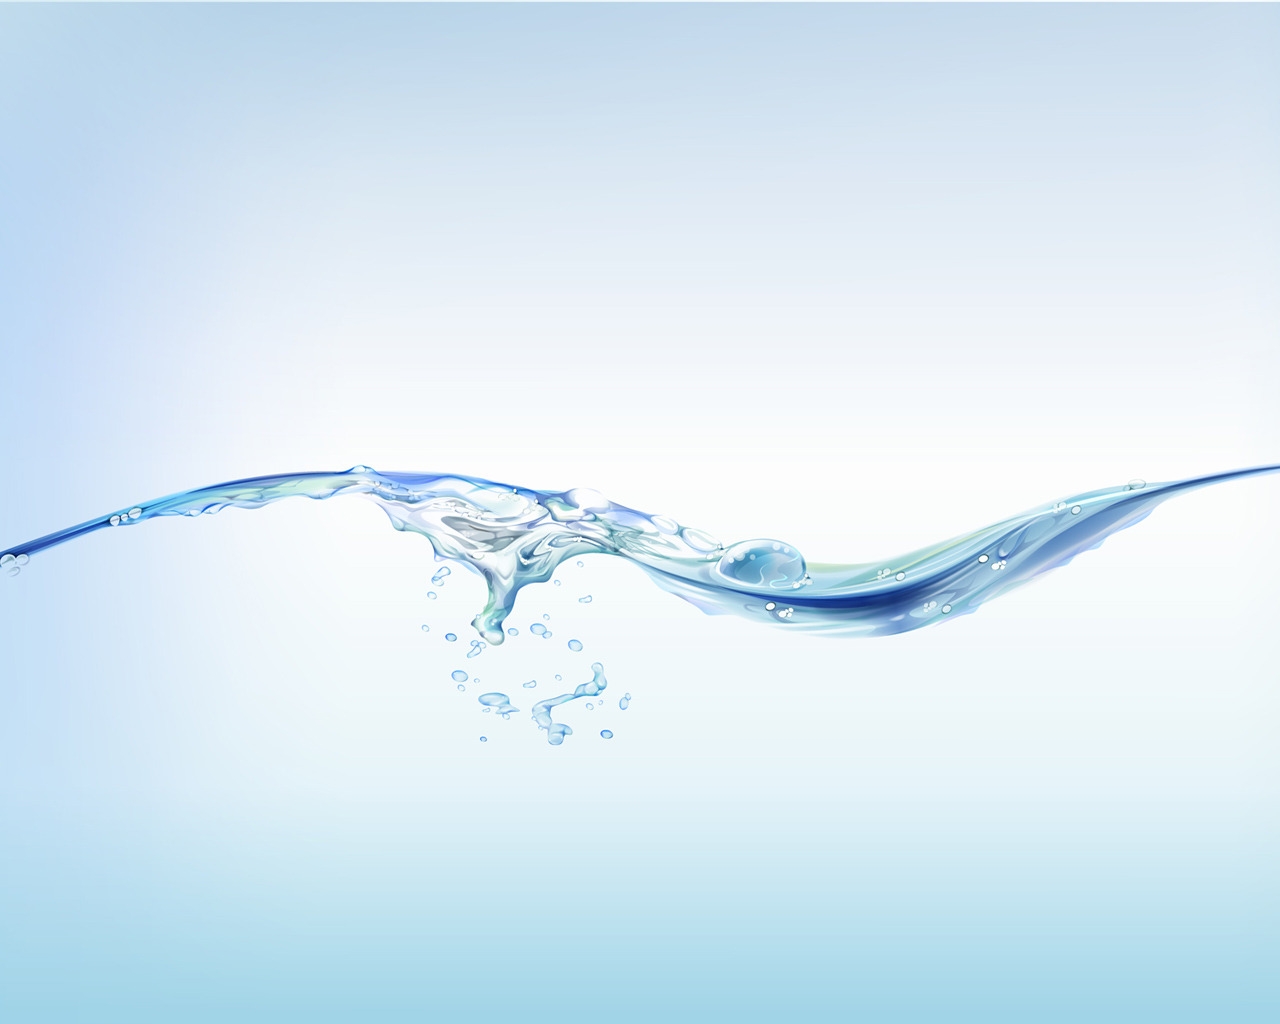 Minimal Water for 1280 x 1024 resolution